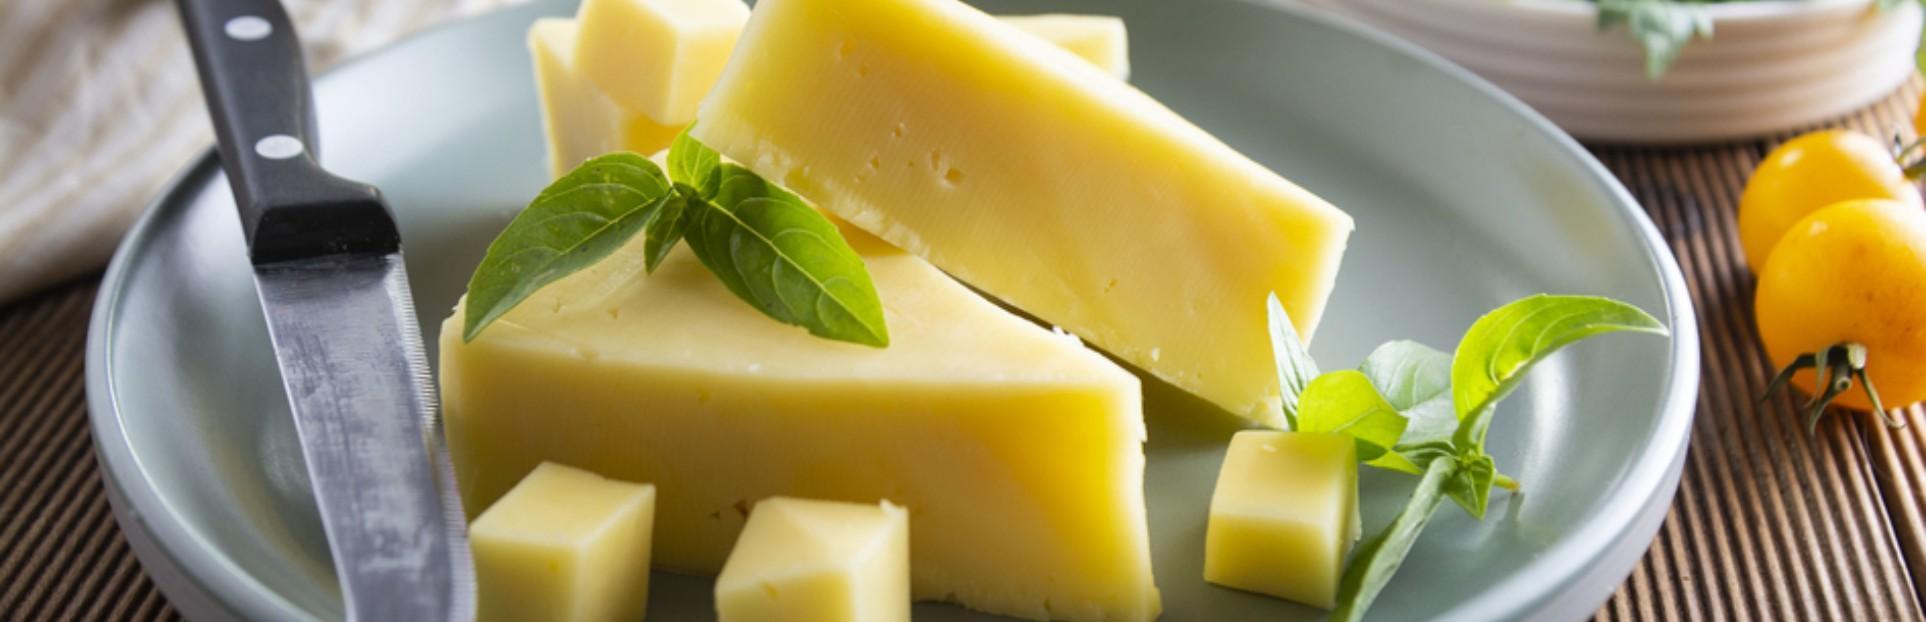 Global Cheese Market Trends